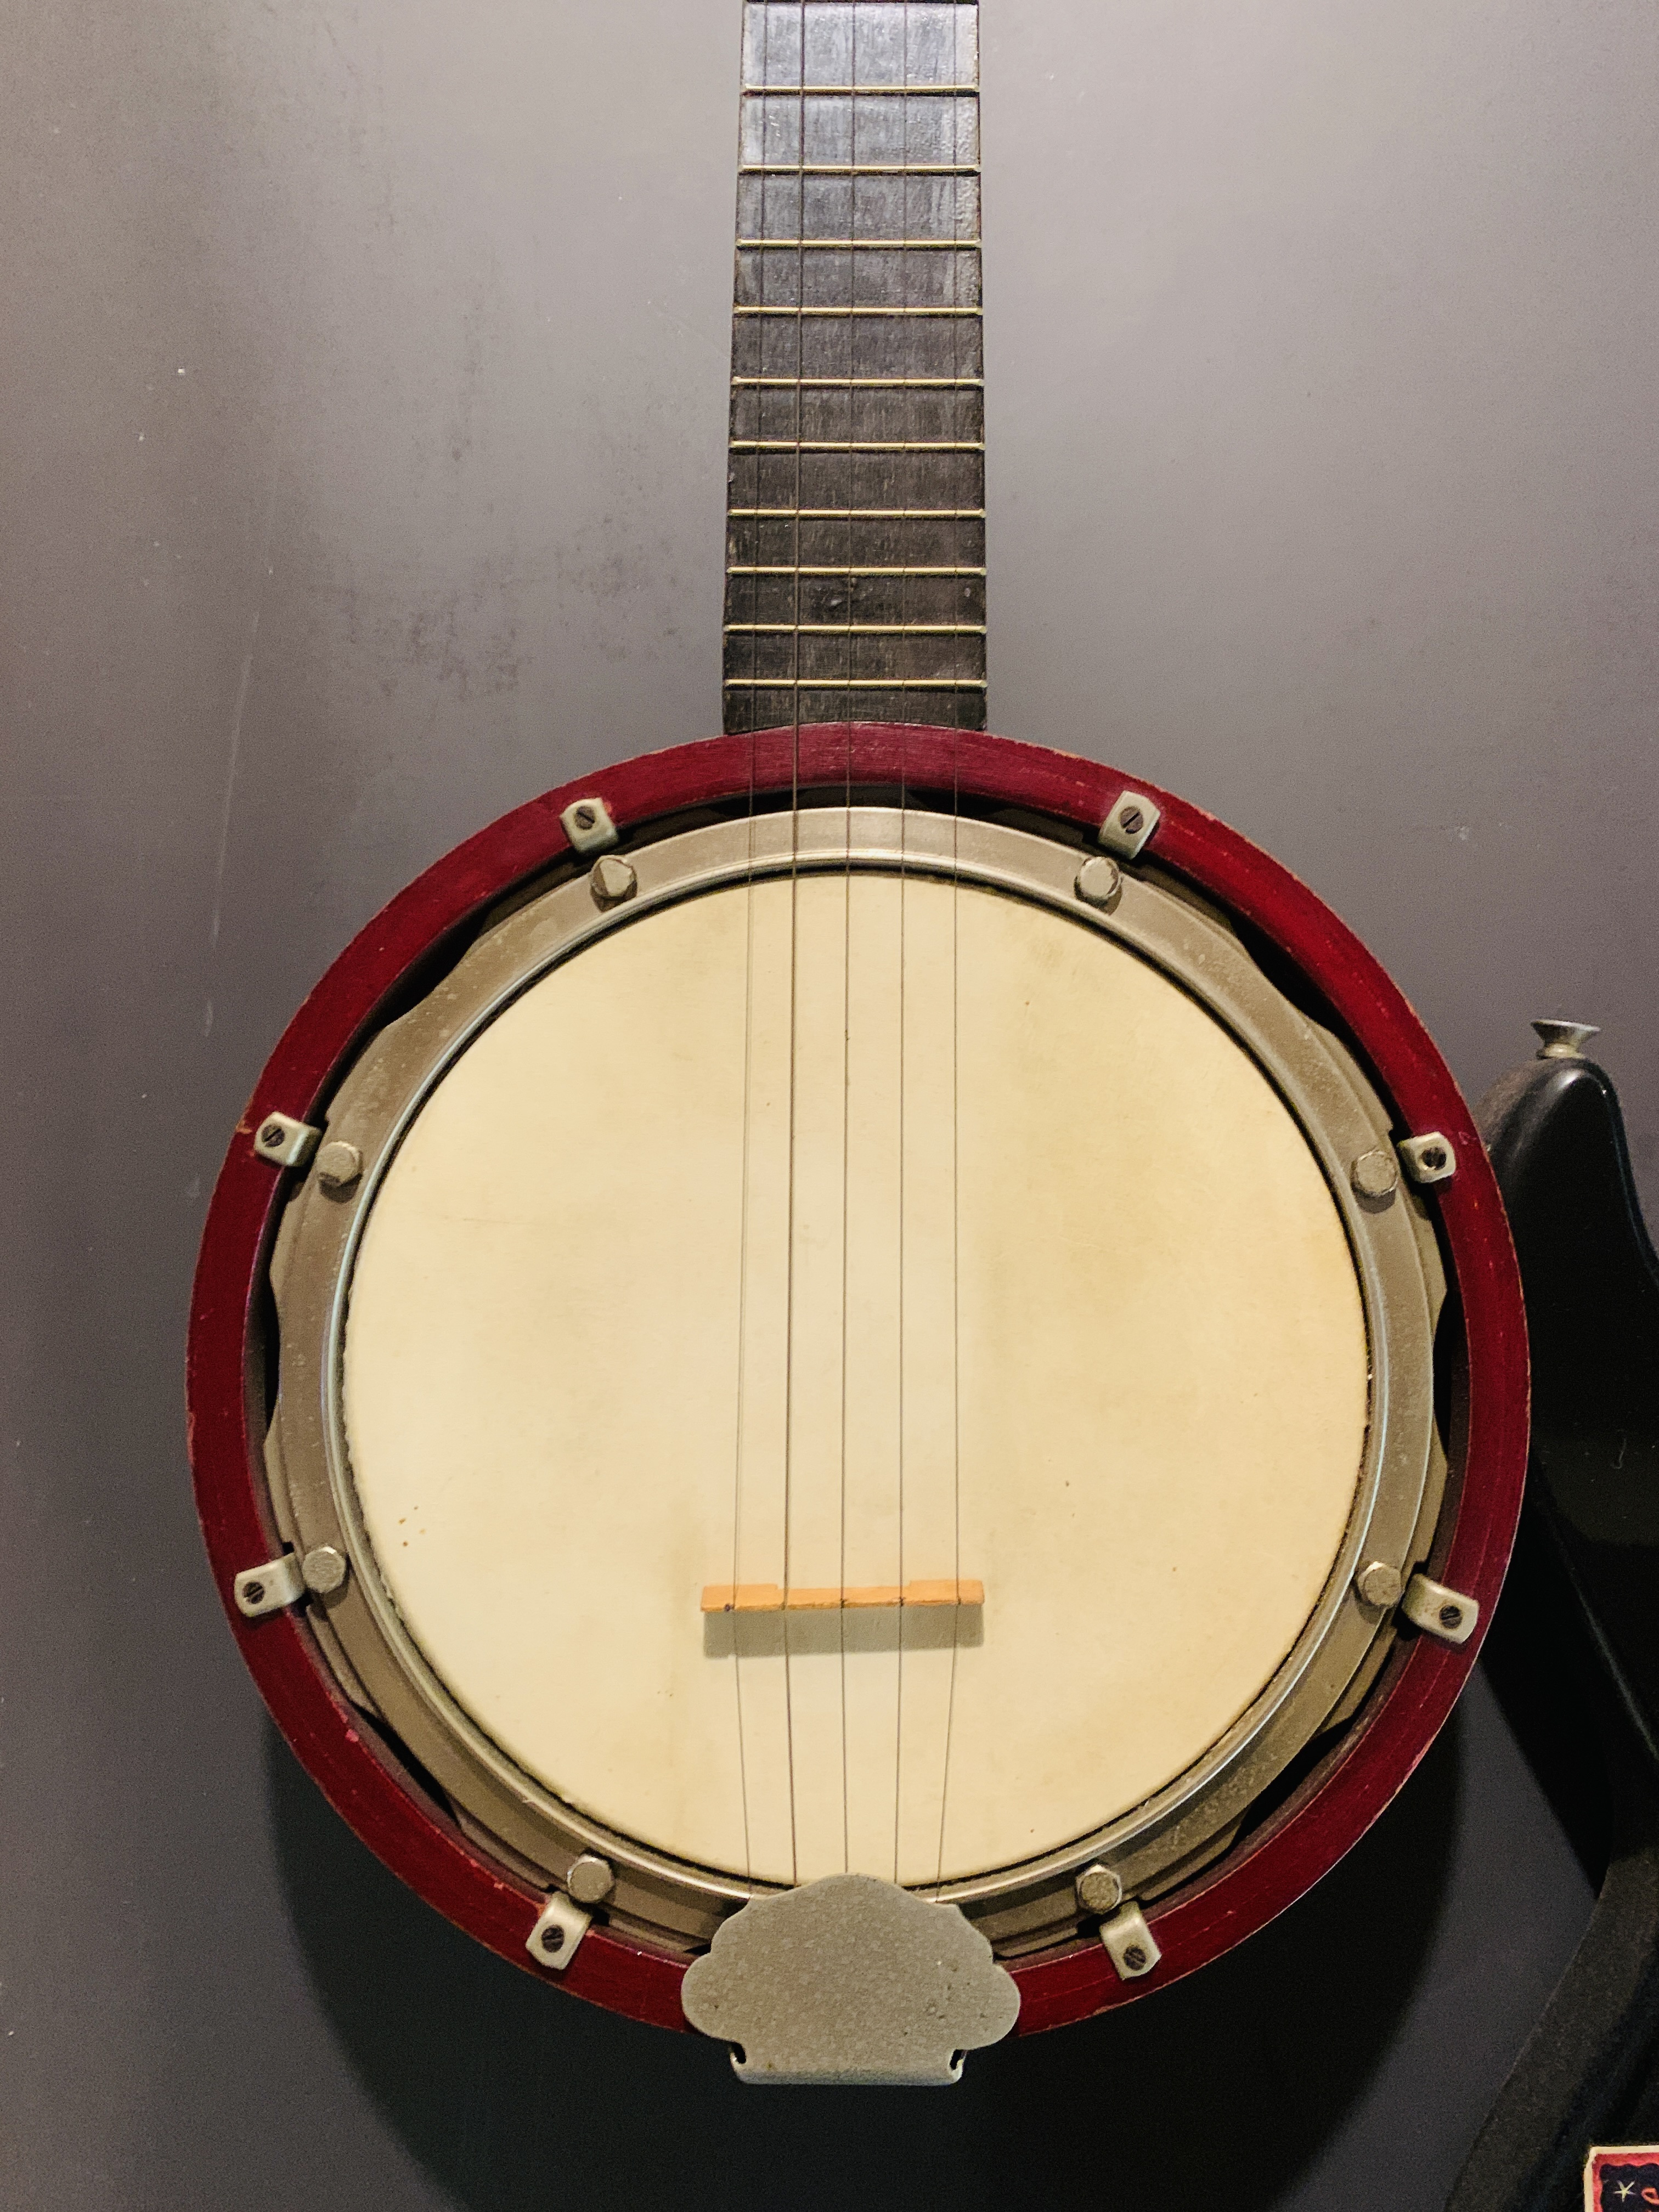 A BERRY BANJO AND AN ENCORE ELECTRIC LEAD GUITAR (HAVE BEEN USED AS WALL DECORATION) - SOLD AS SEEN - Image 5 of 5